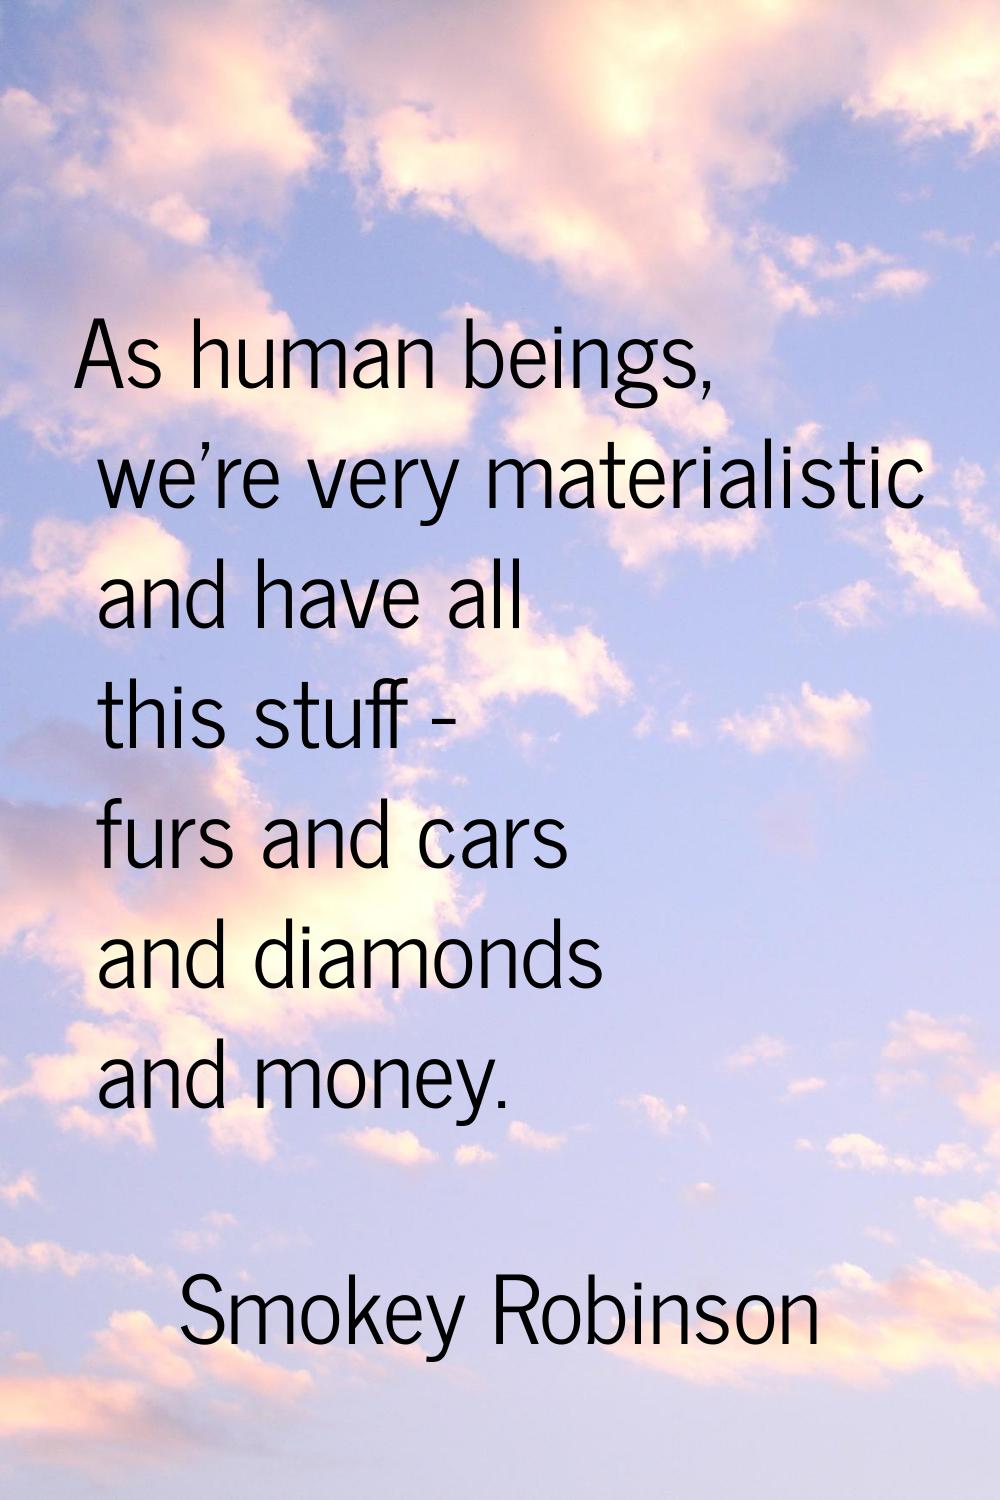 As human beings, we're very materialistic and have all this stuff - furs and cars and diamonds and 